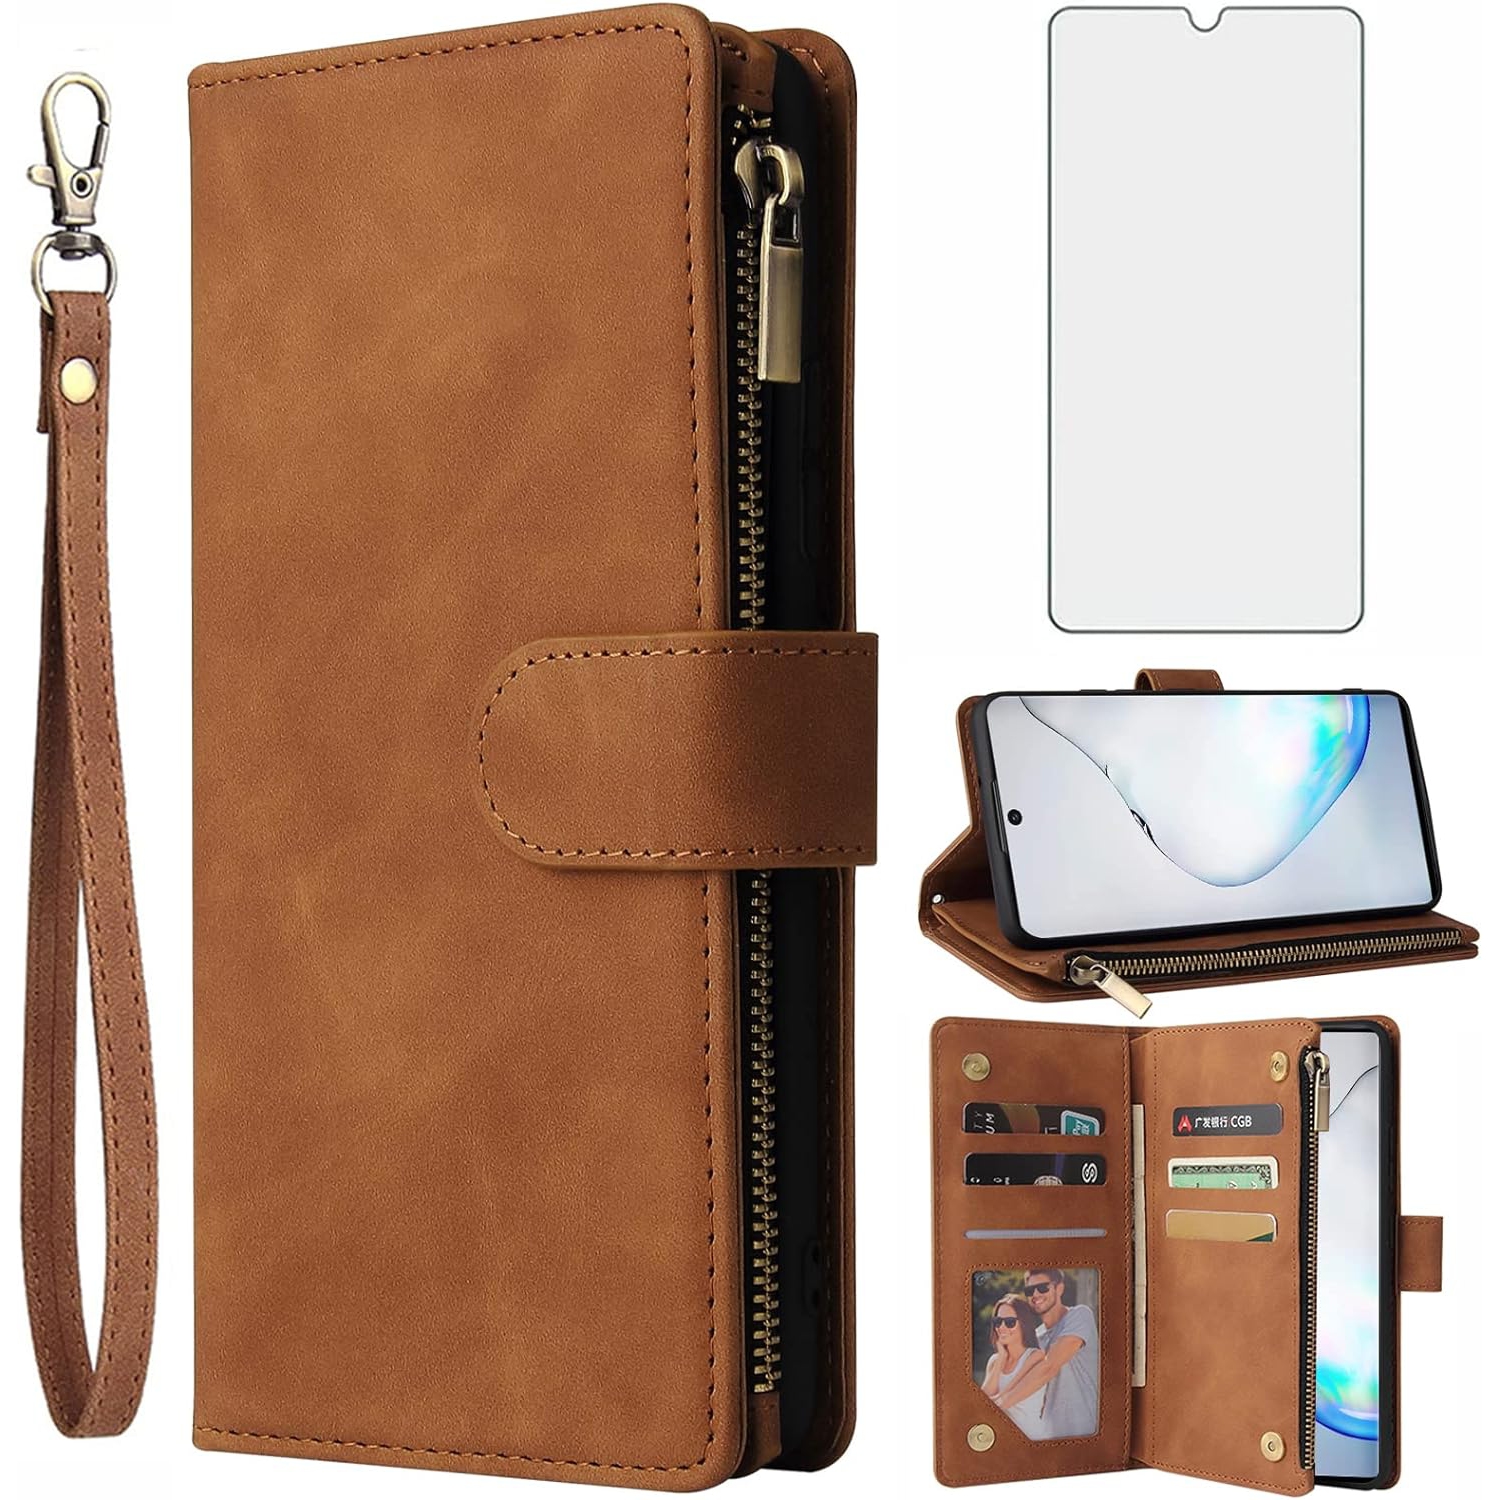 Compatible with Samsung Galaxy Note 10 Lite Wallet Case Tempered Glass Screen Protector and Flip Cover Card